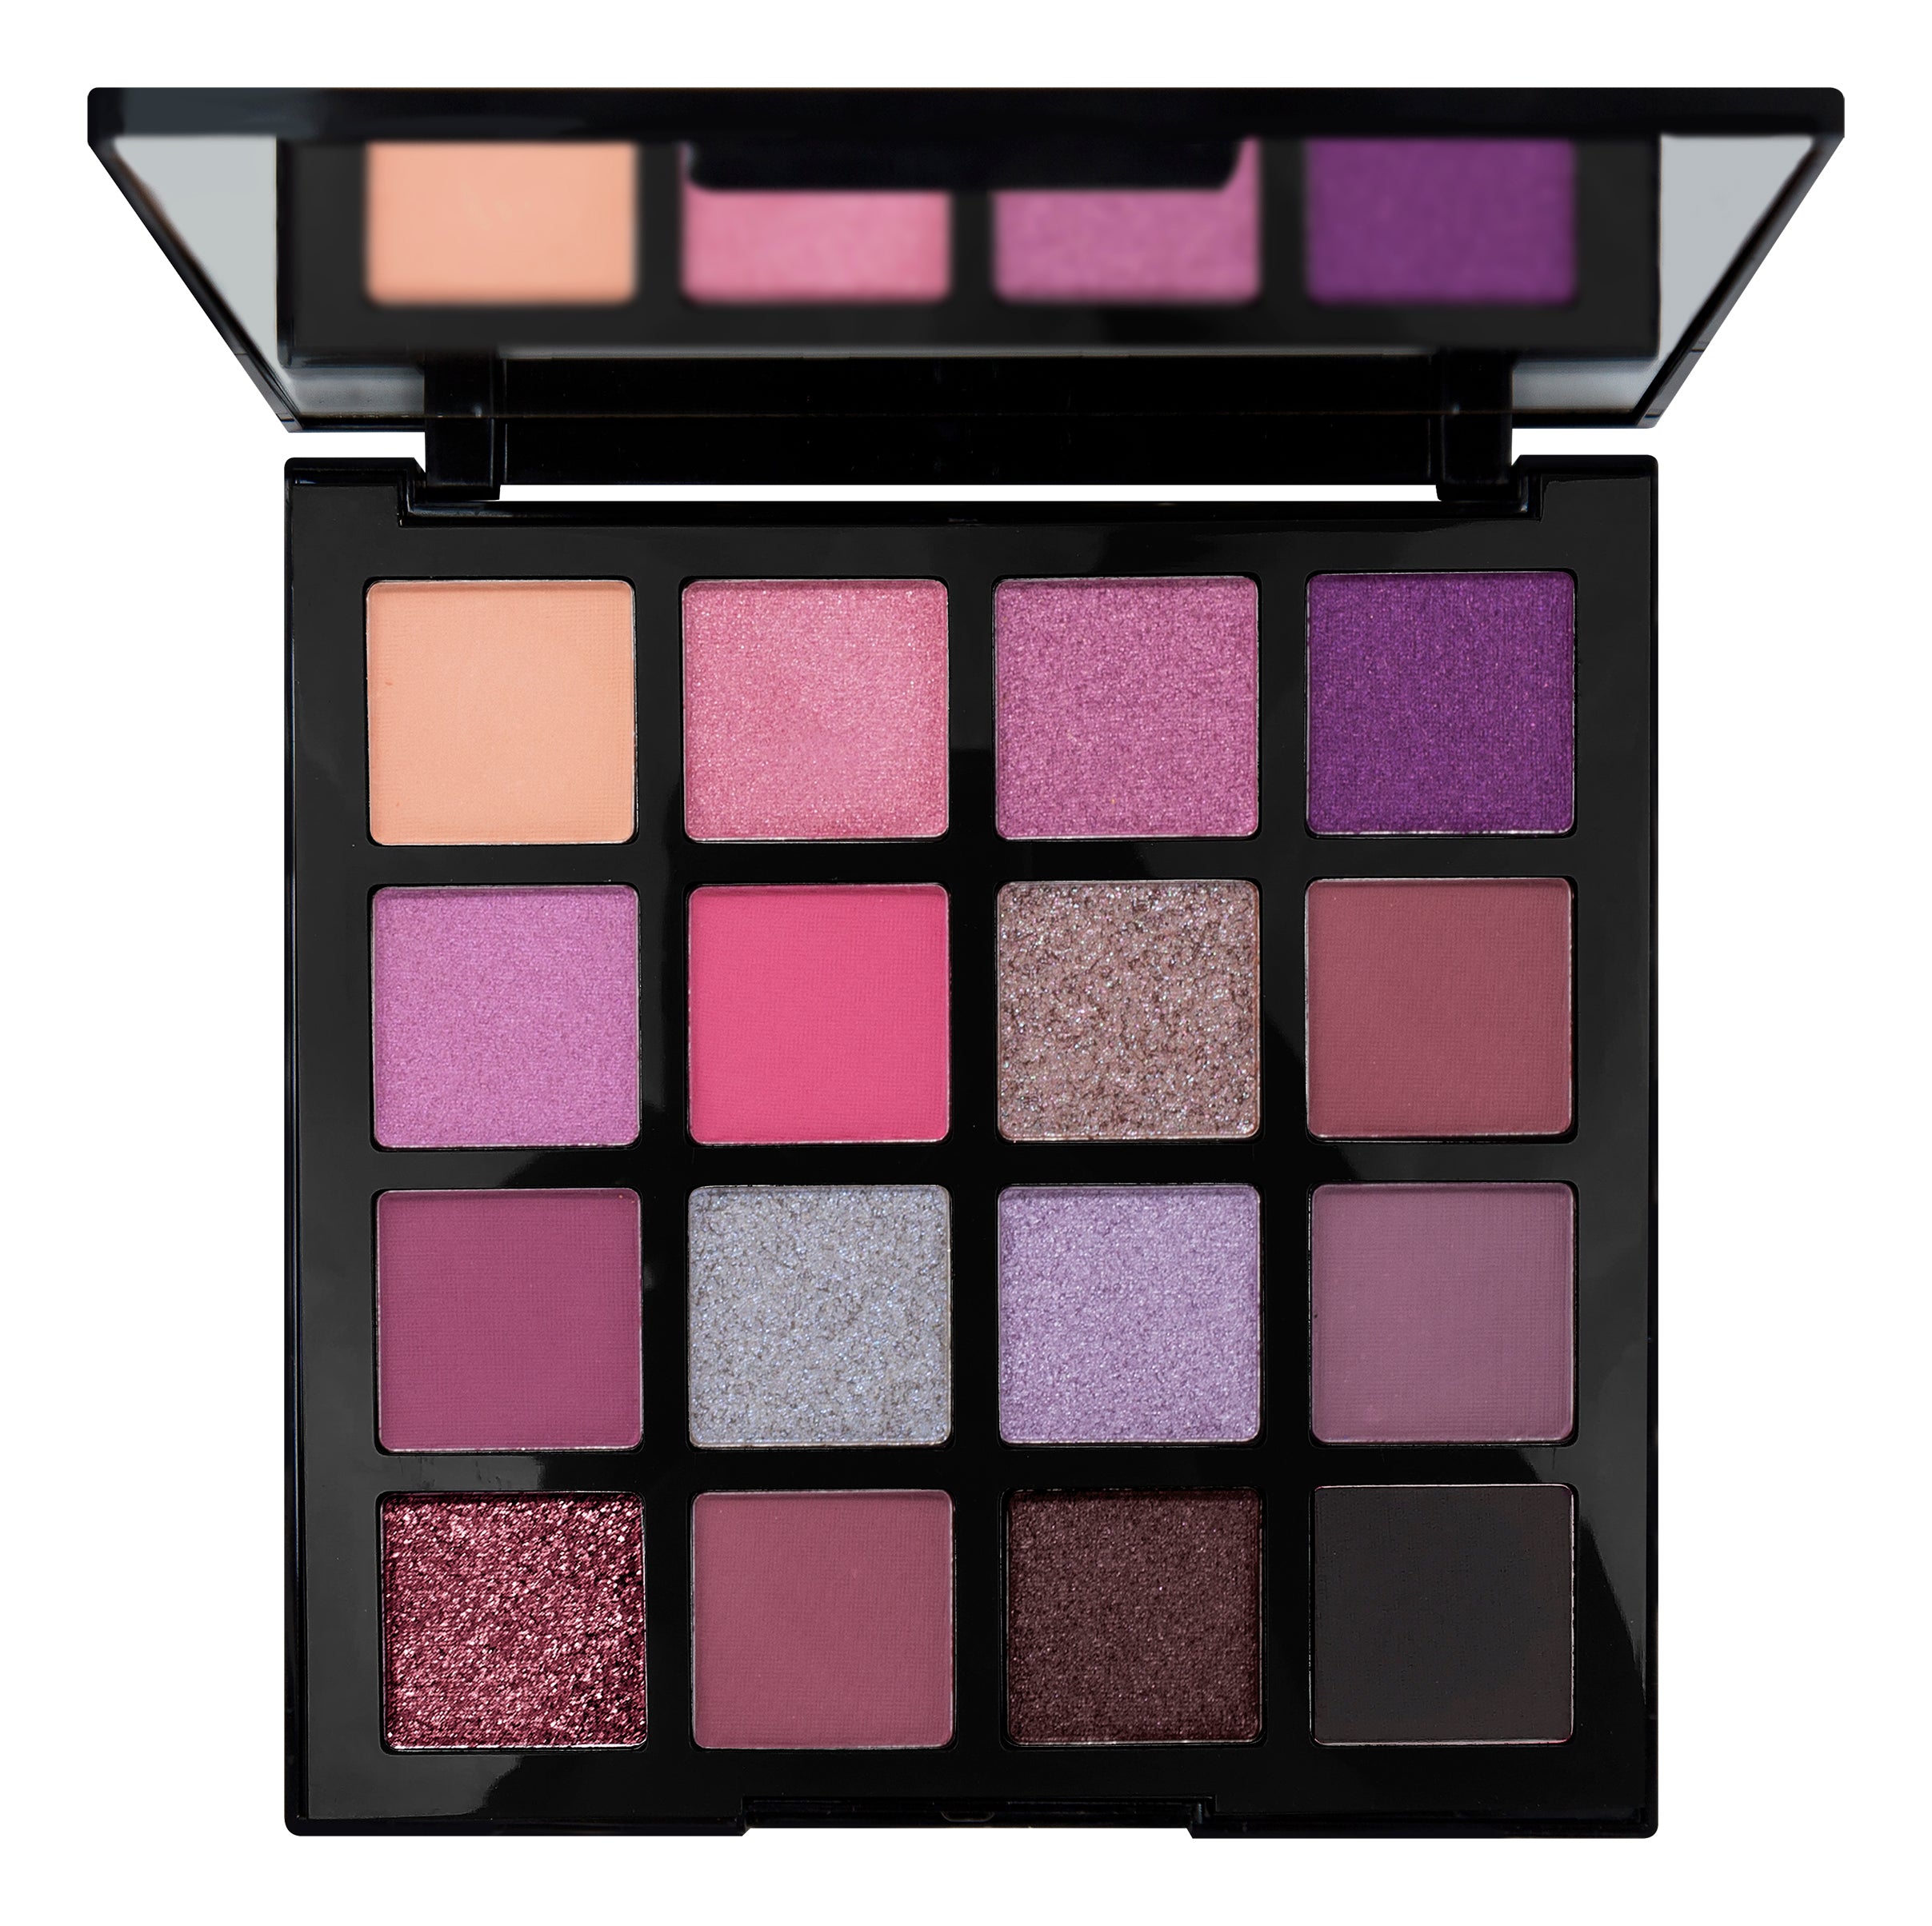 L.A. Girl 16 Color Break Free Eyeshadow Palette - This is me